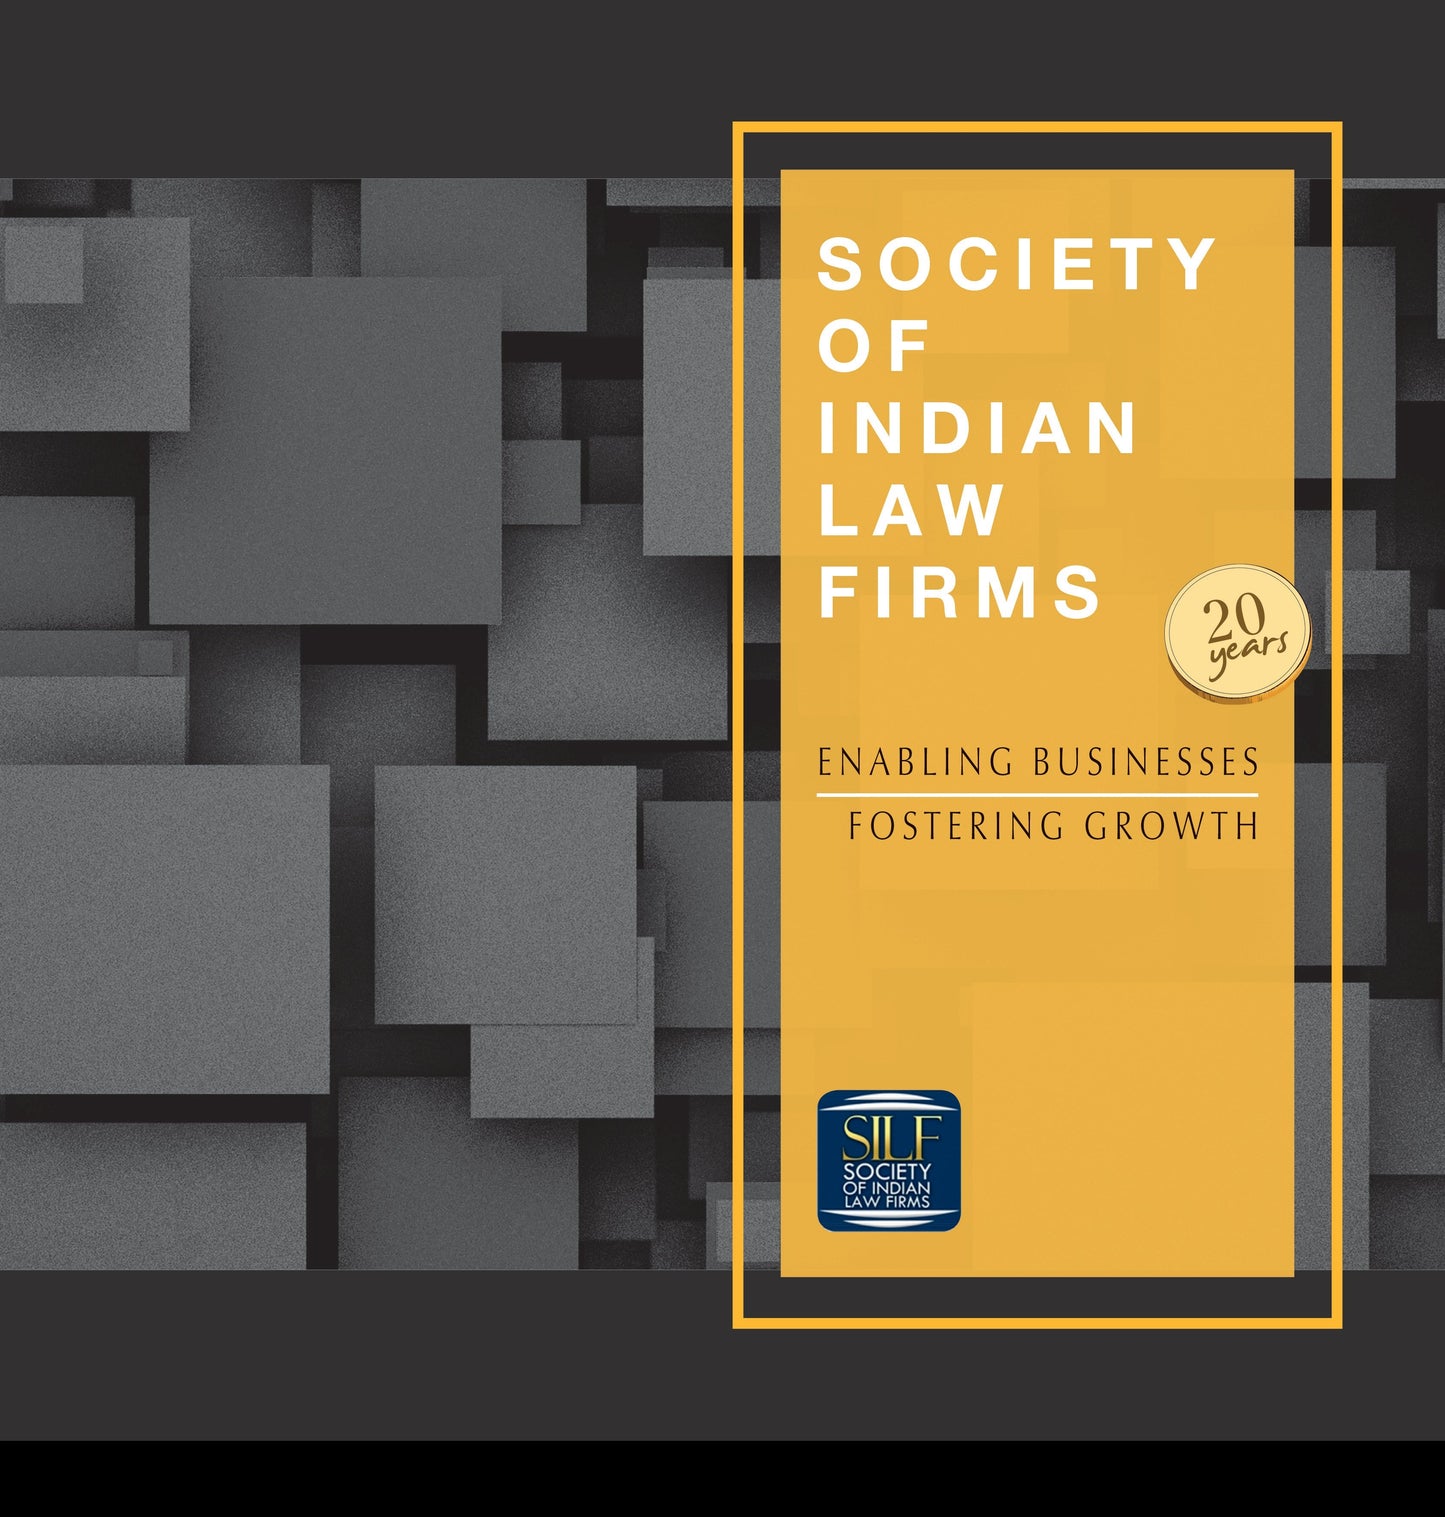 Society of Indian Law Firms